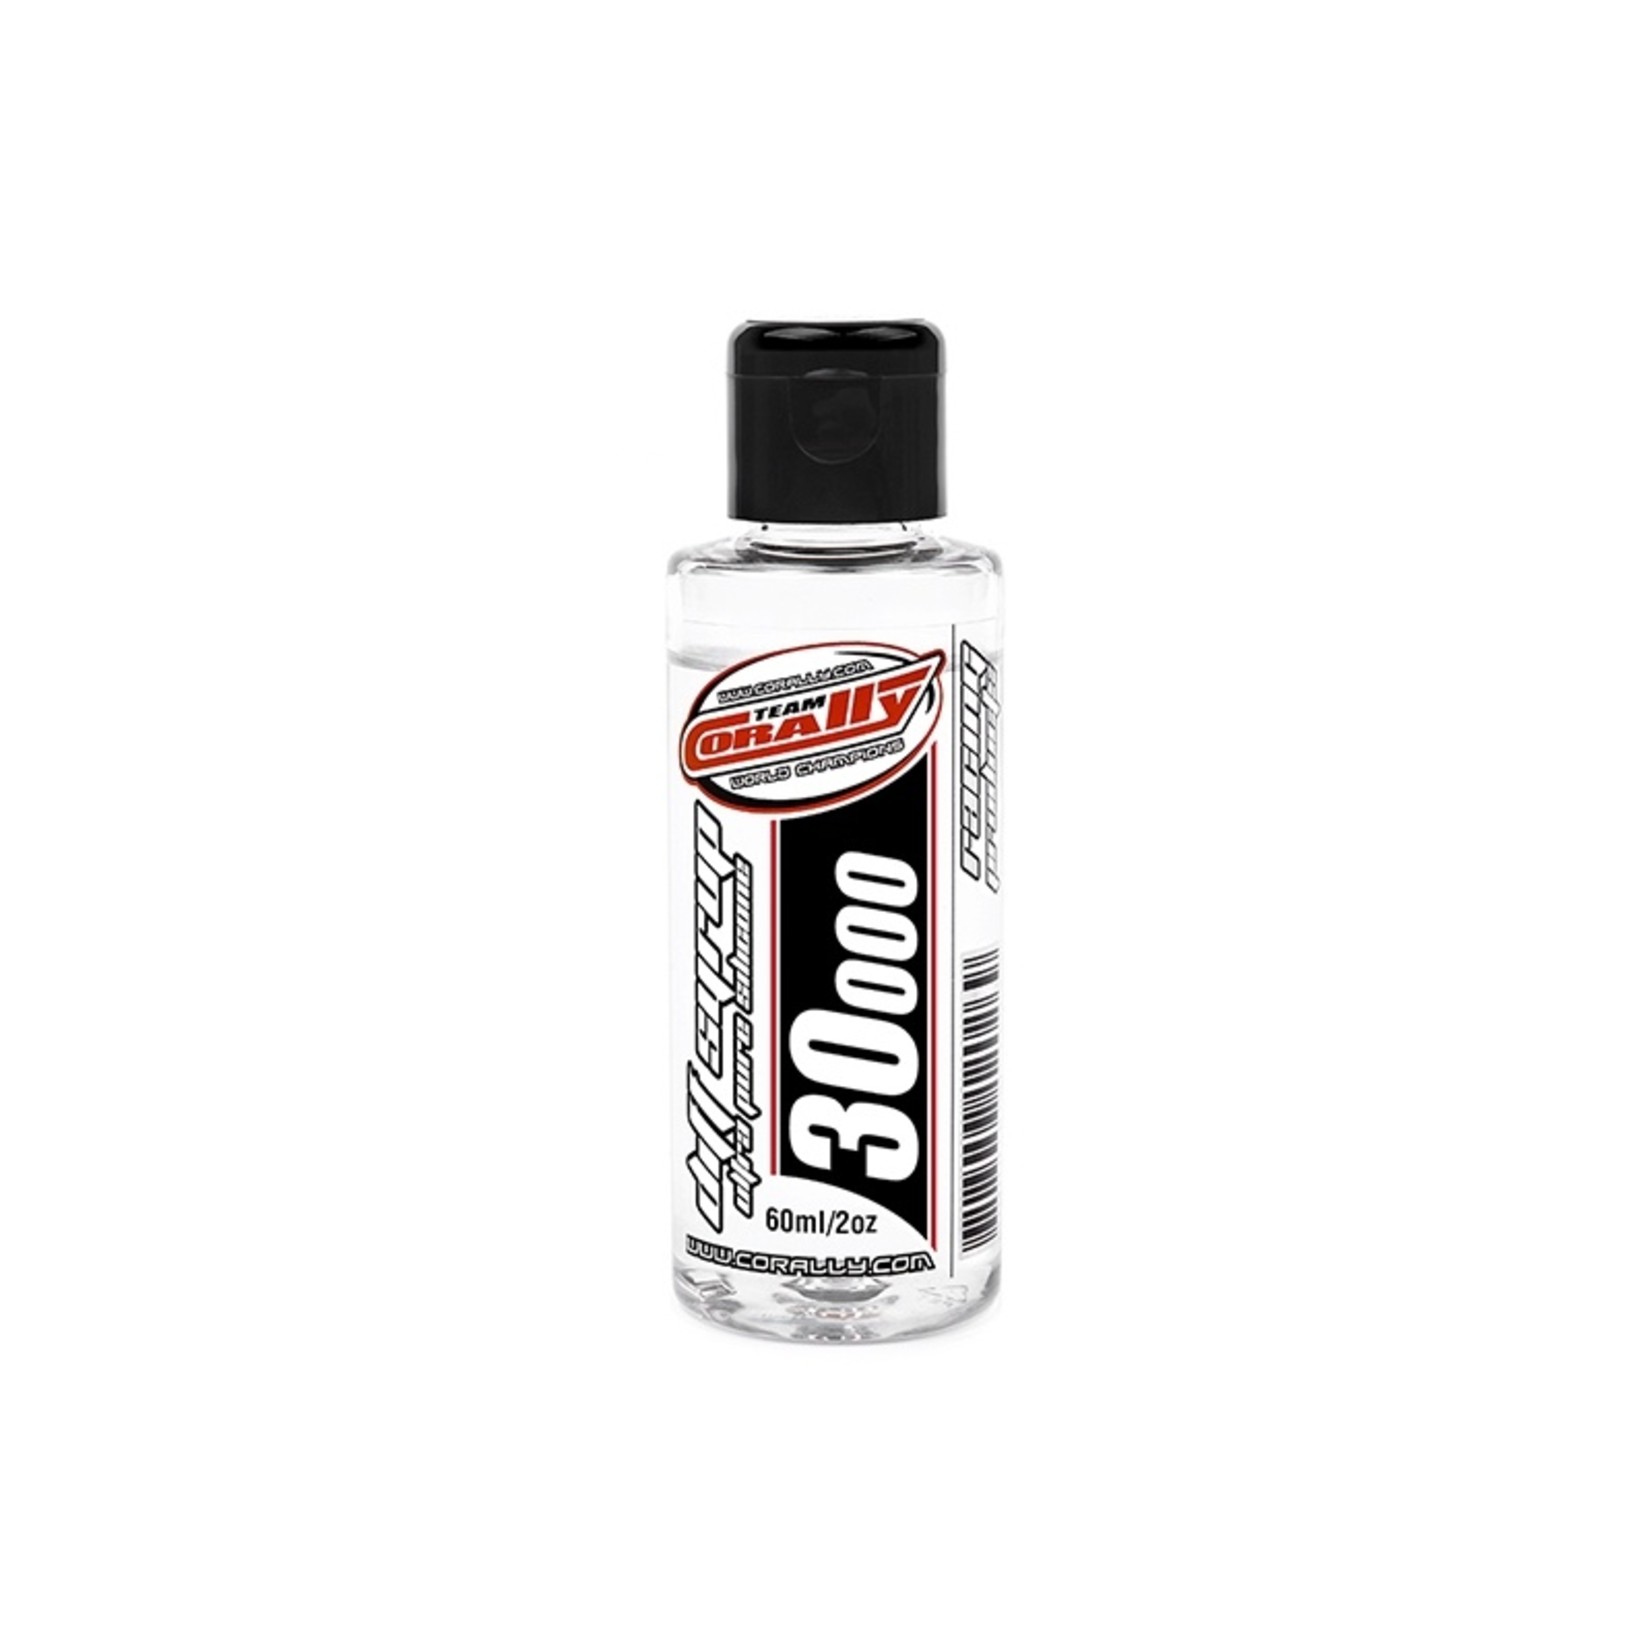 Corally (Team Corally) Ultra Pure Silicone Diff Oil (Syrup) - 30000 CPS - 60ml